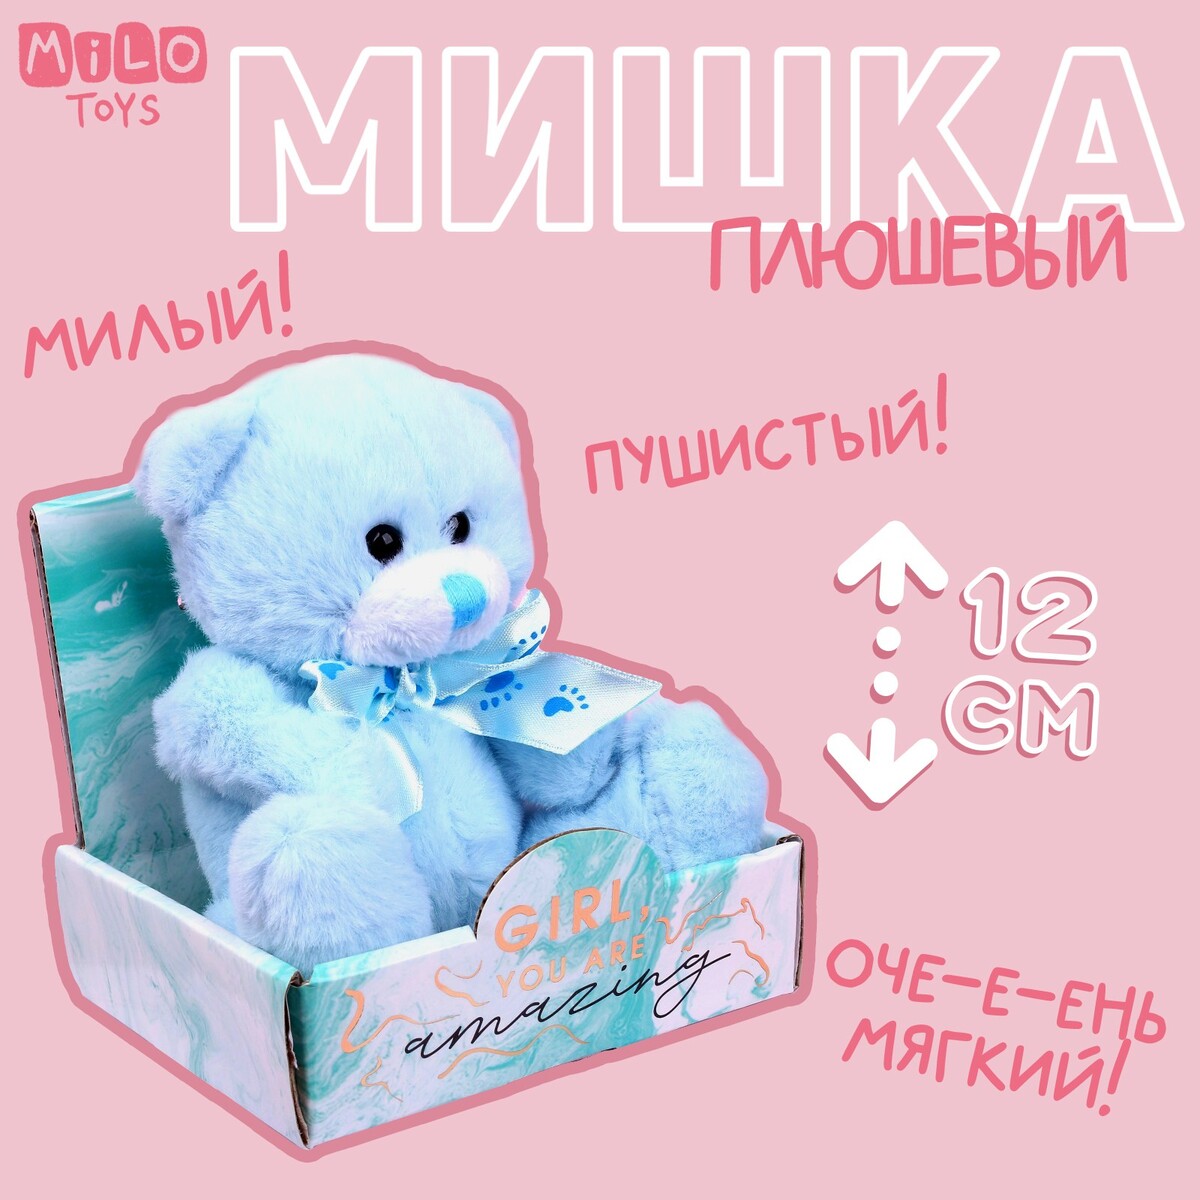 Мягкая игрушка girl, you are amazing, мишка, 12 см there once lived a girl who seduced her sister s husband and he hanged himself